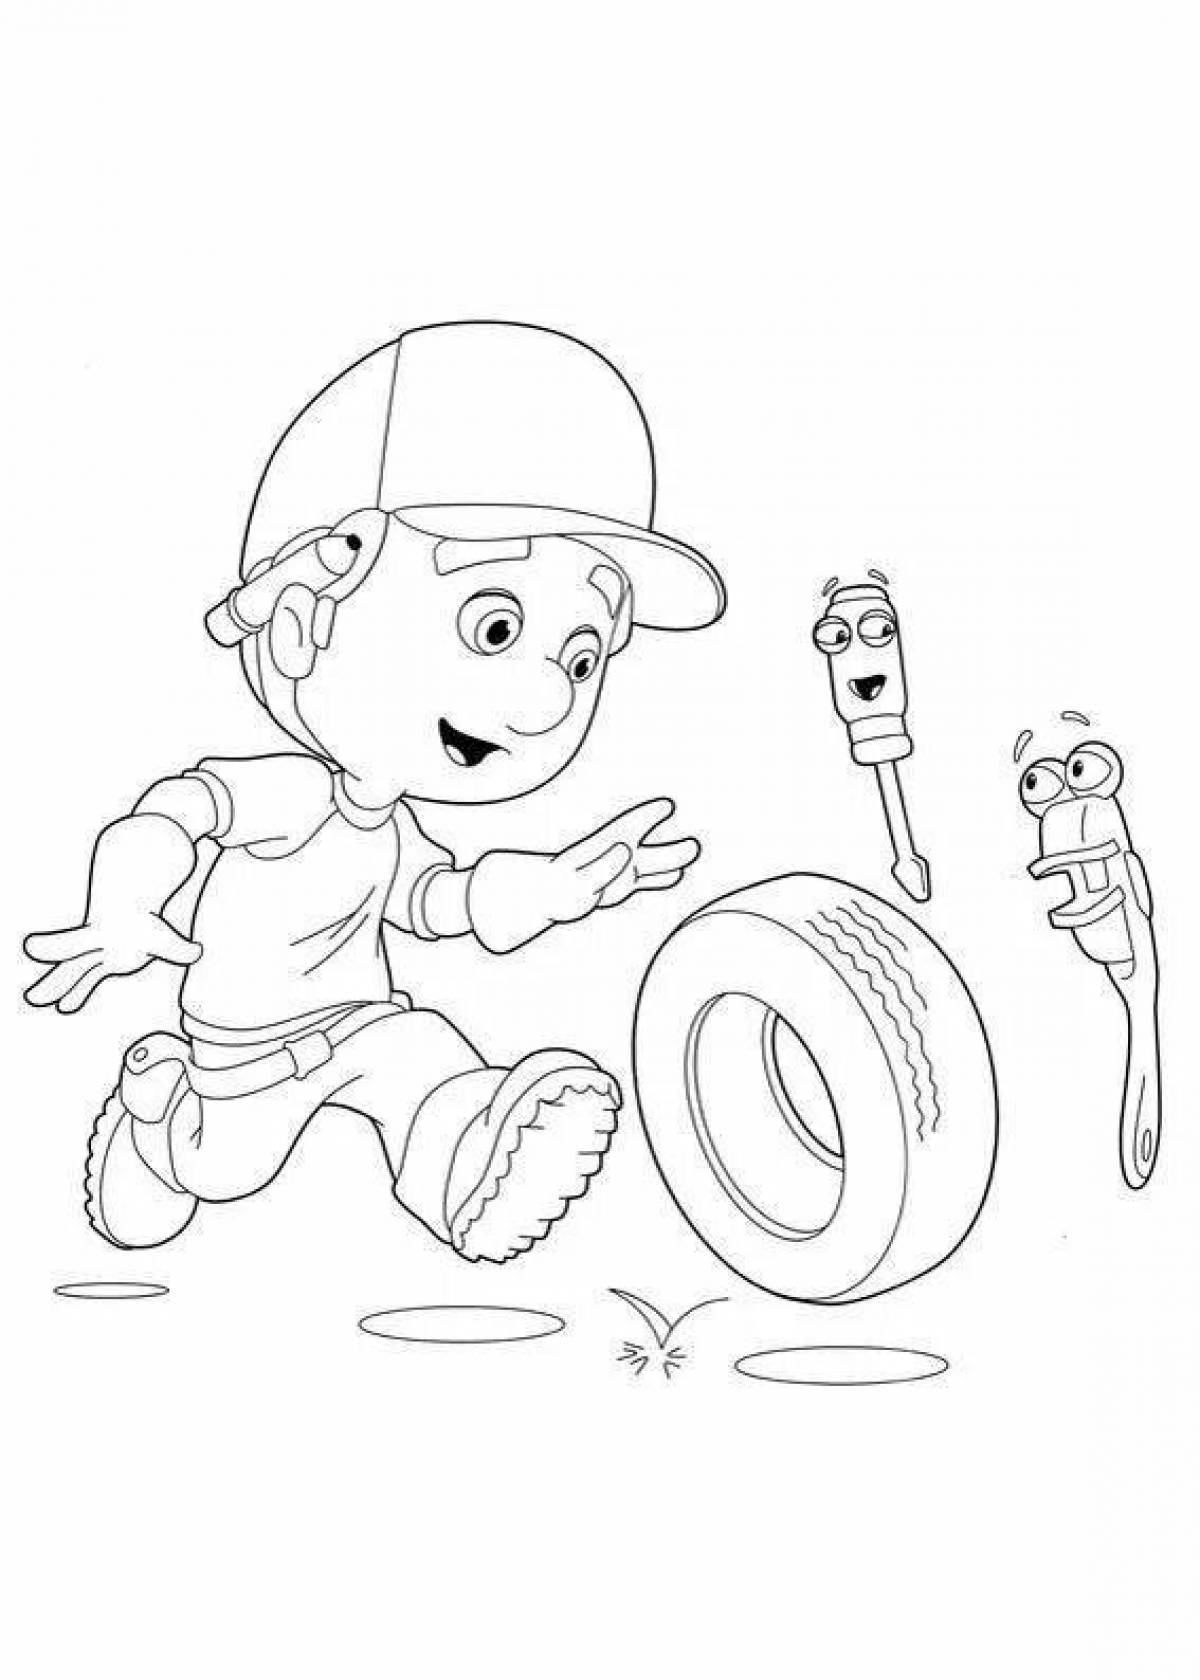 Intriguing cog coloring page